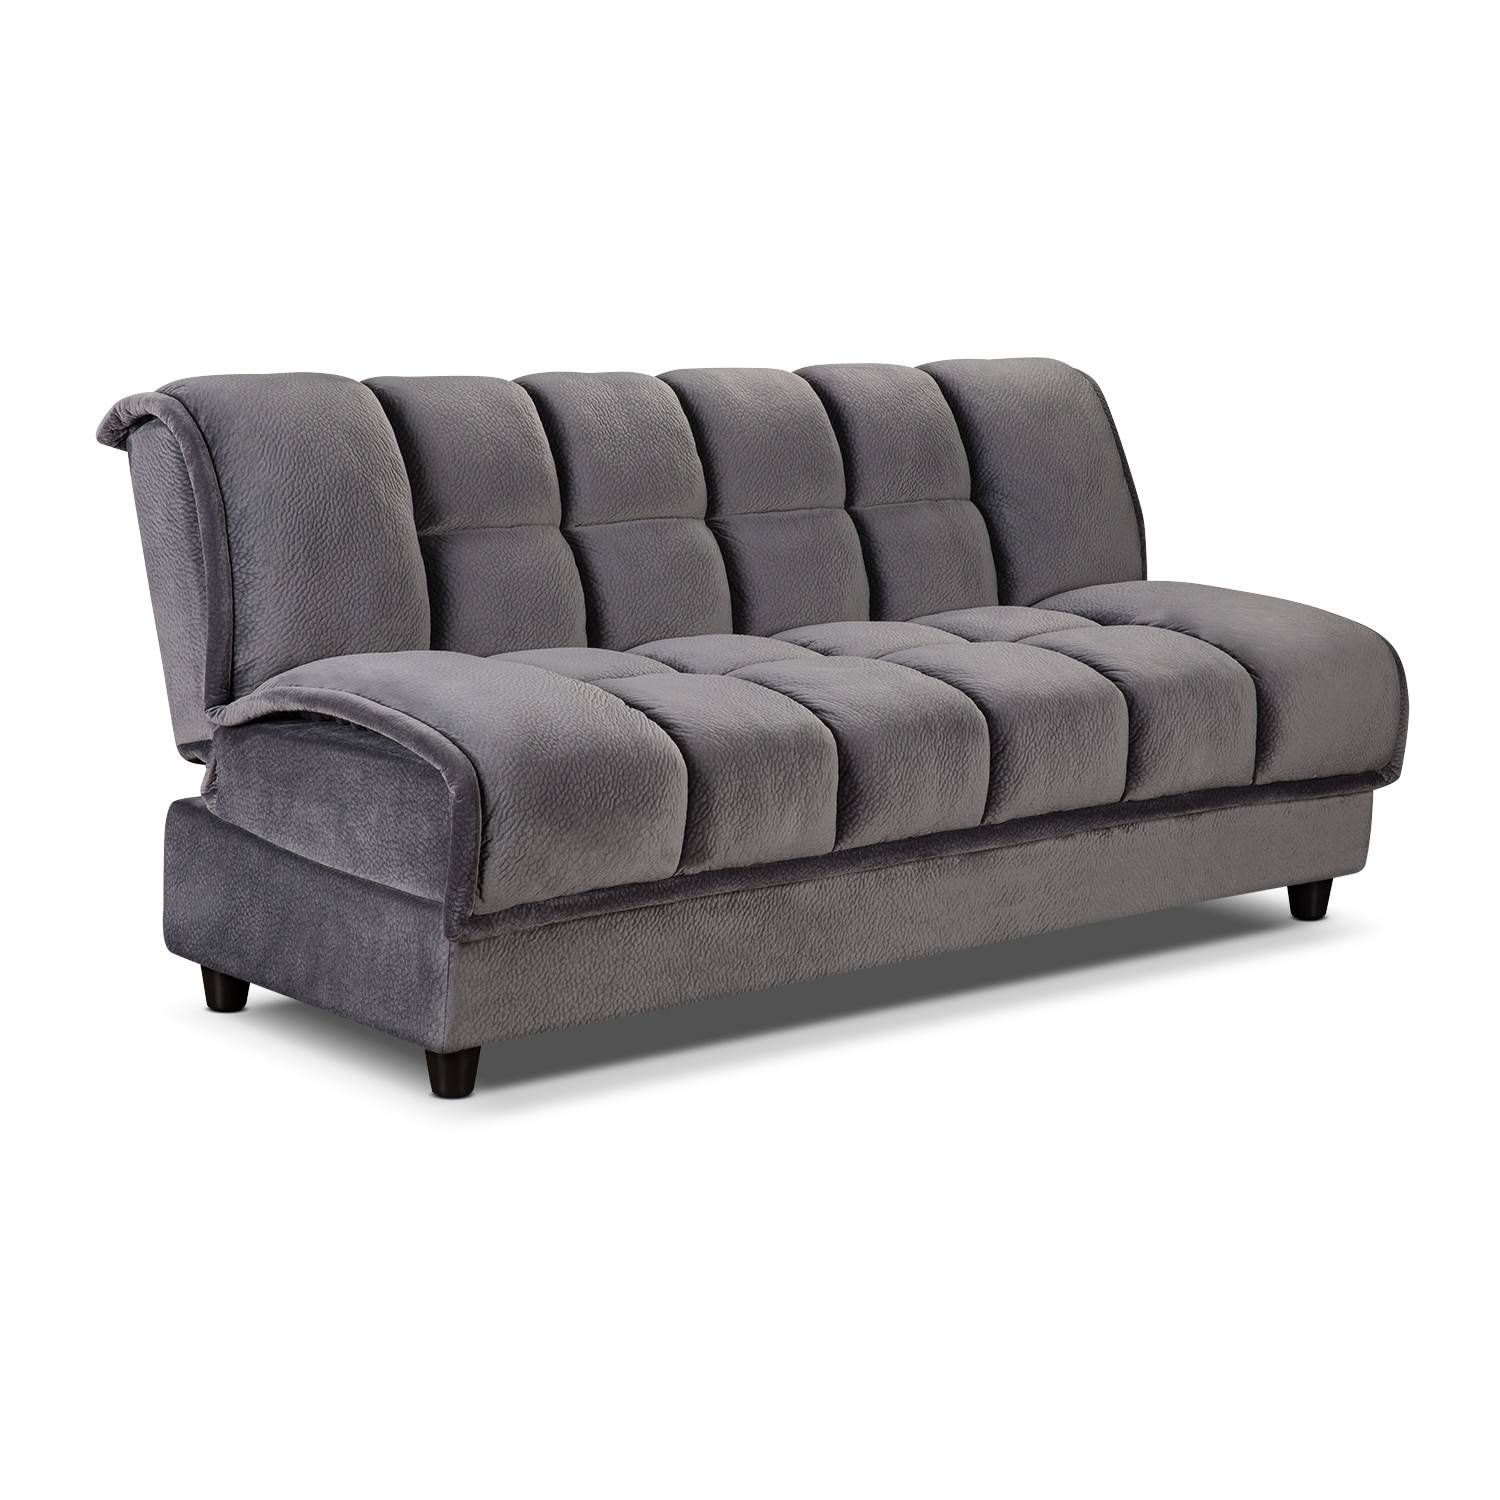 Bennett Futon Sofa Bed – Espresso | American Signature Furniture Within American Sofa Beds (View 19 of 30)